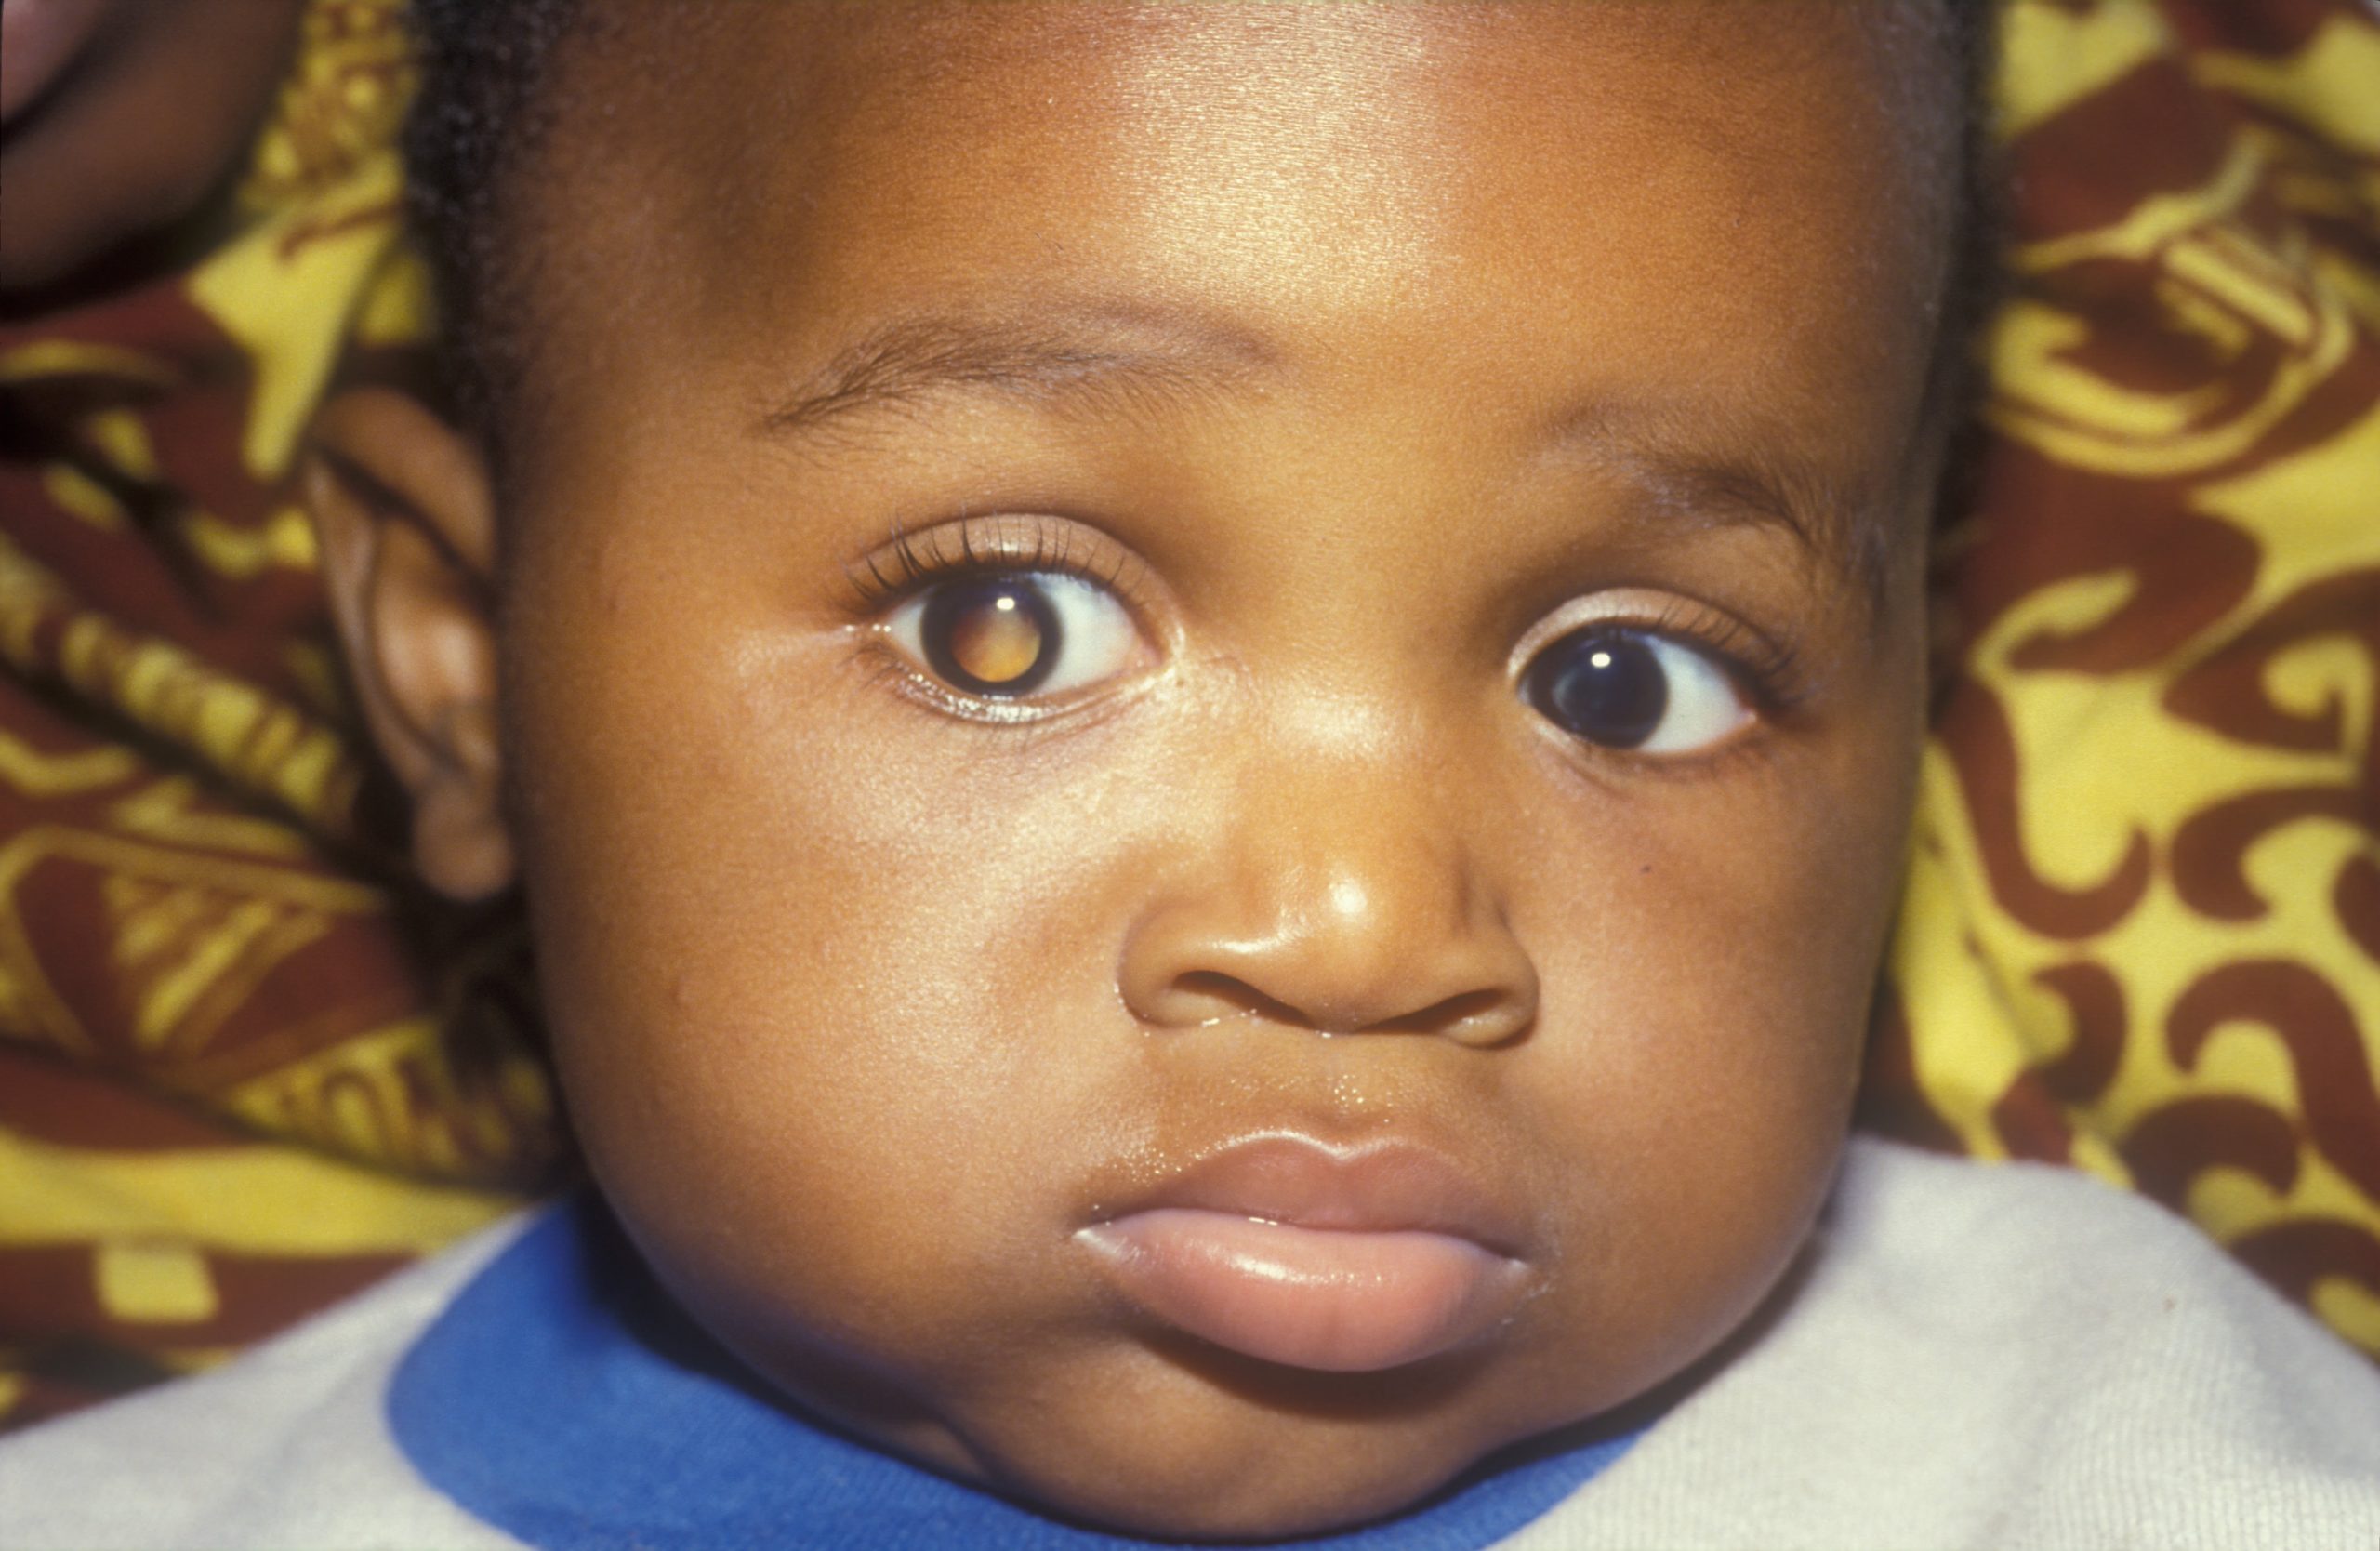 A baby with visible retinoblastoma in a light reflection looks at the camera